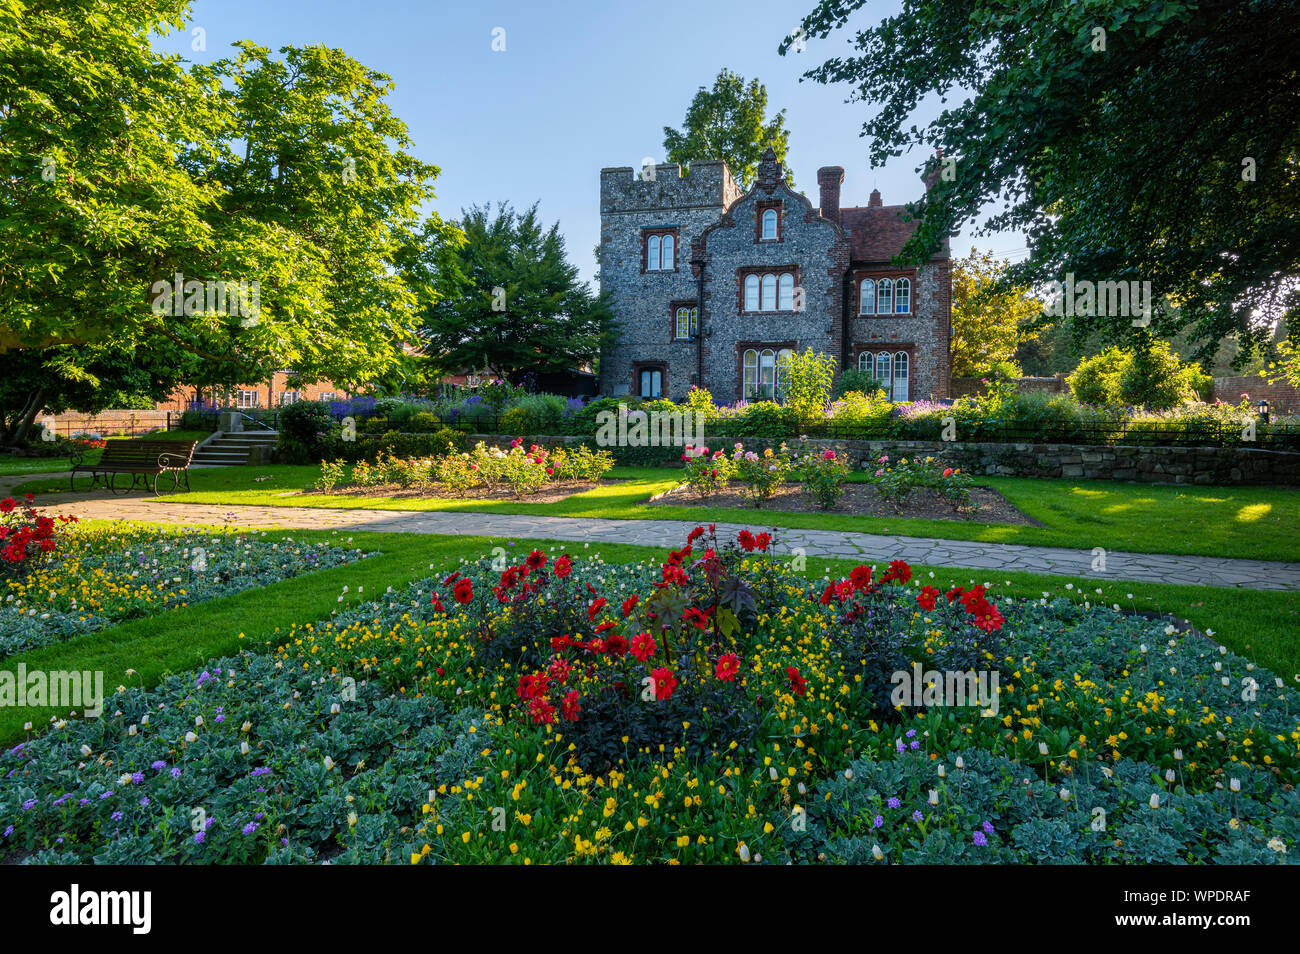 The Tower House in Westgate Gardens; a pretty public park in Canterbury, Kent. Stock Photo